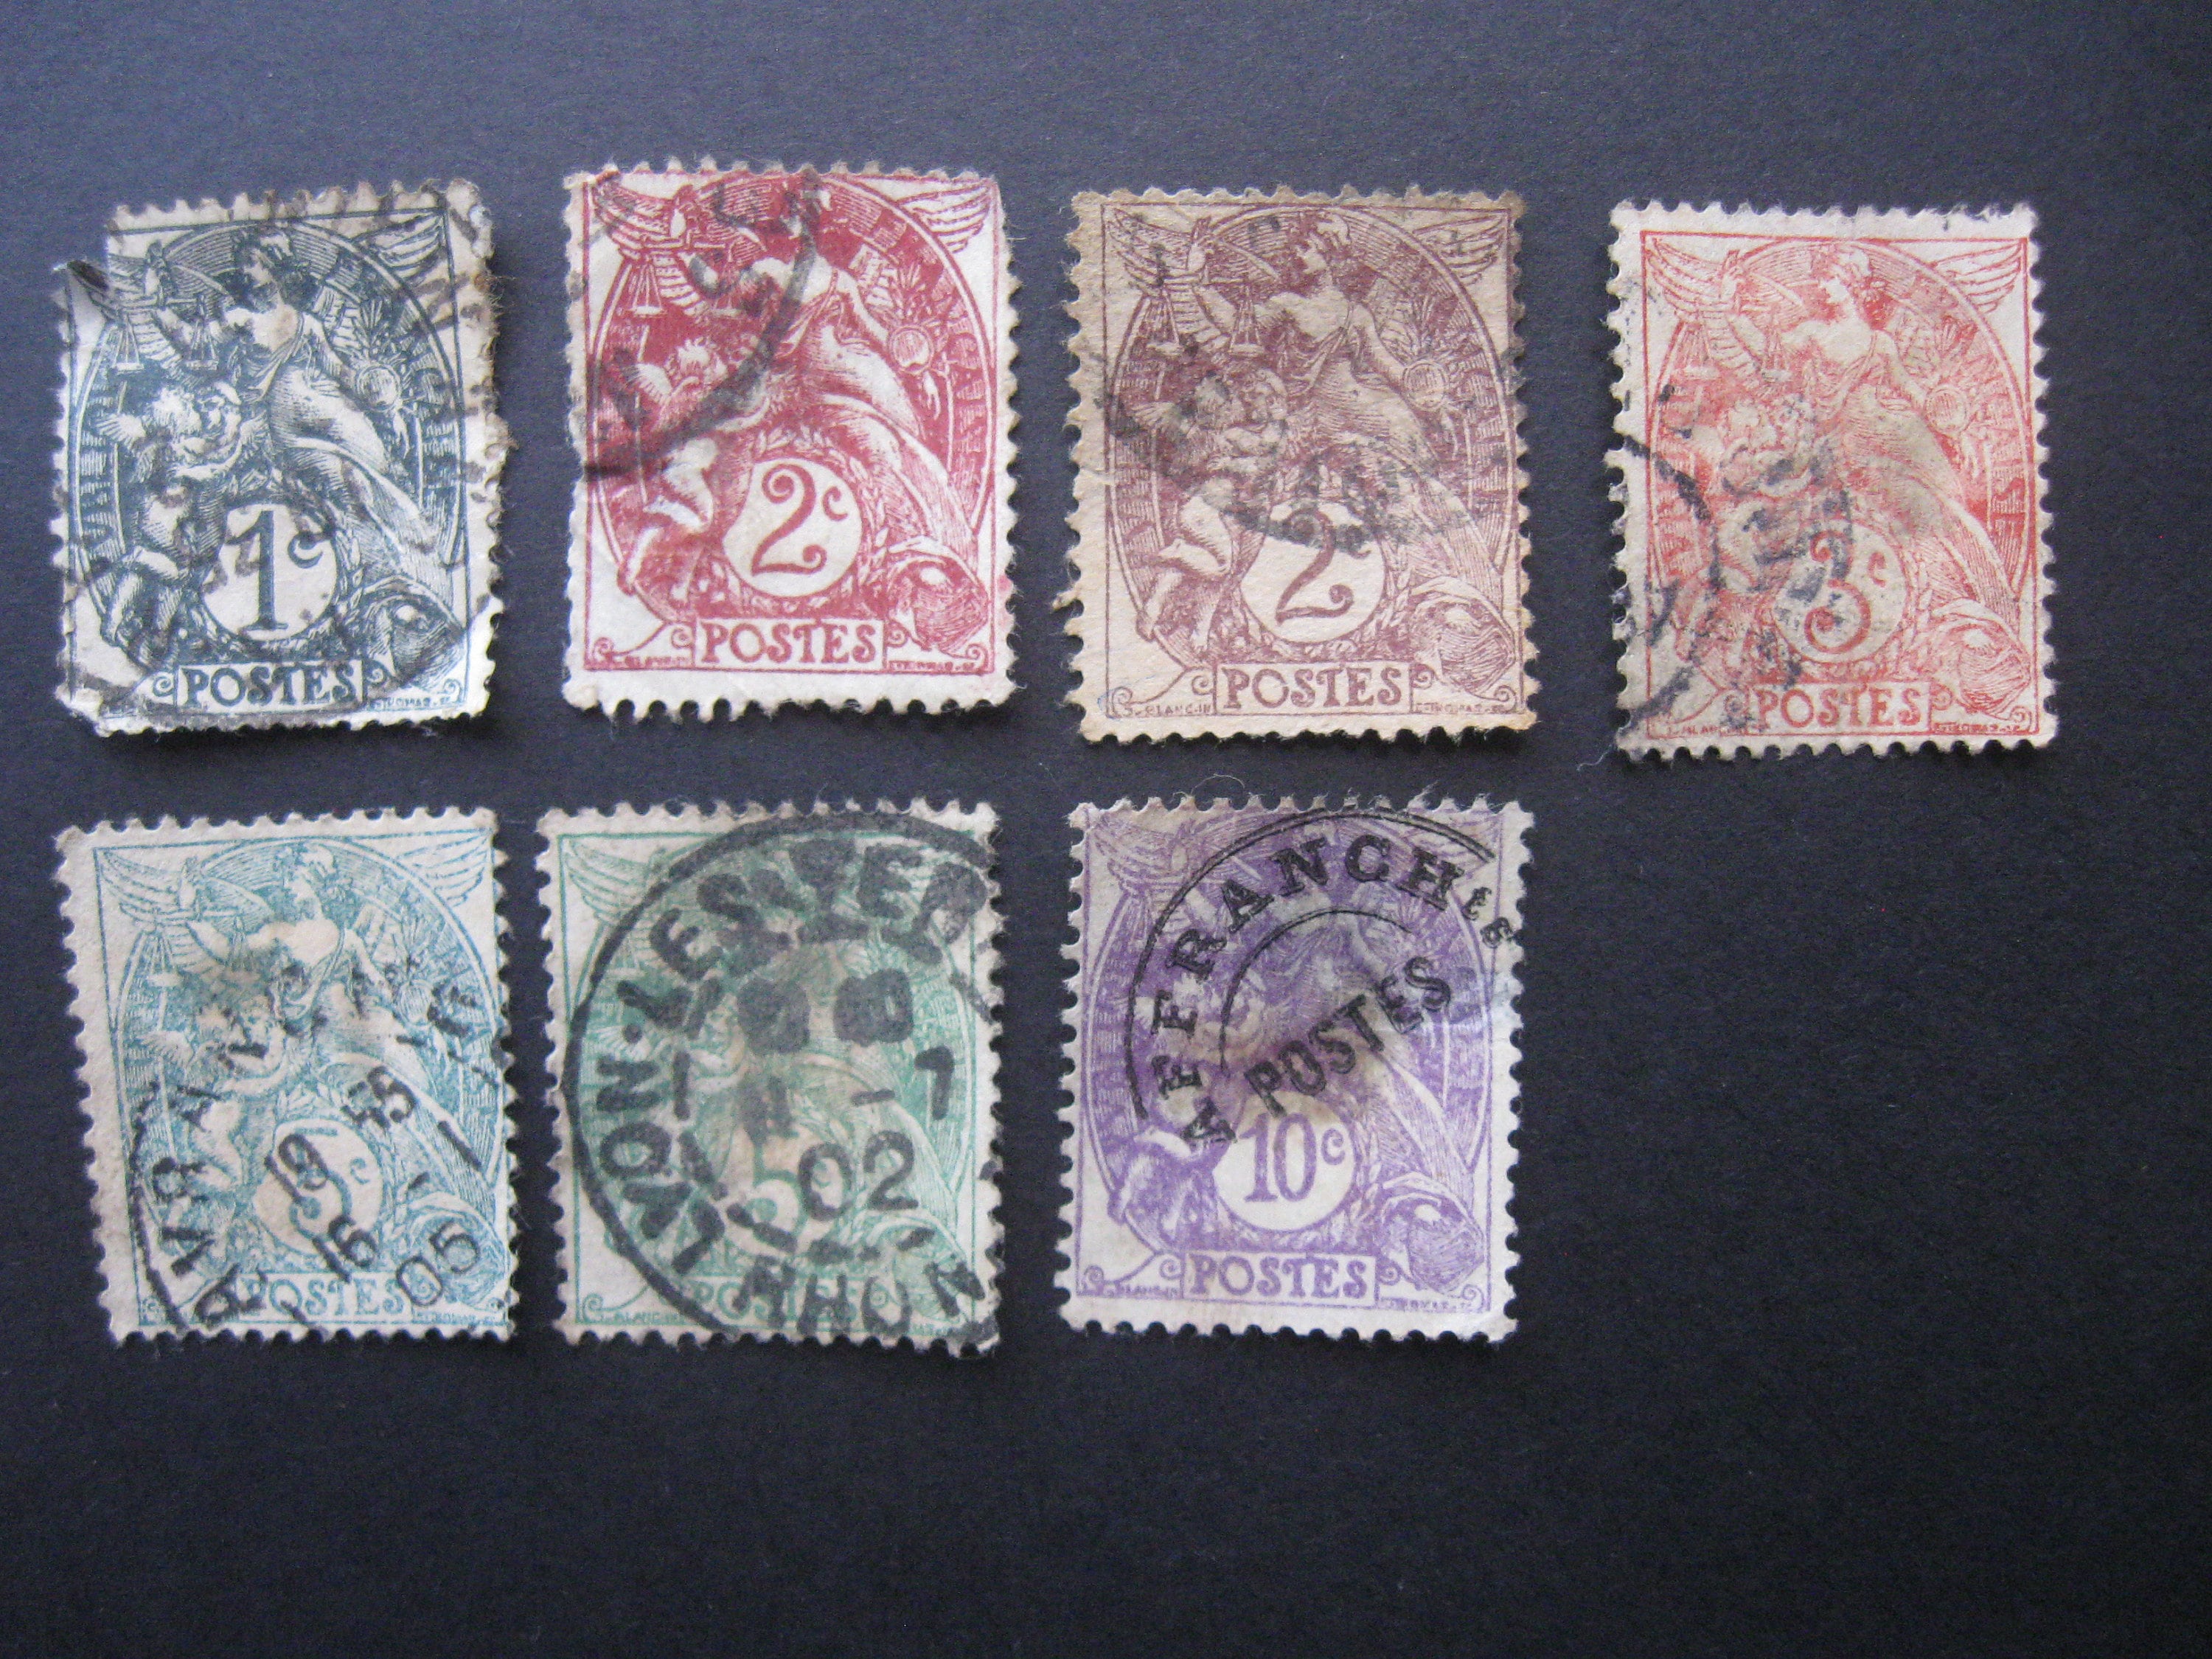 100 French Stamps 15f Used Blue Postage Stamps, Vintage Marianne Post Stamps  From France FREE POSTAGE 